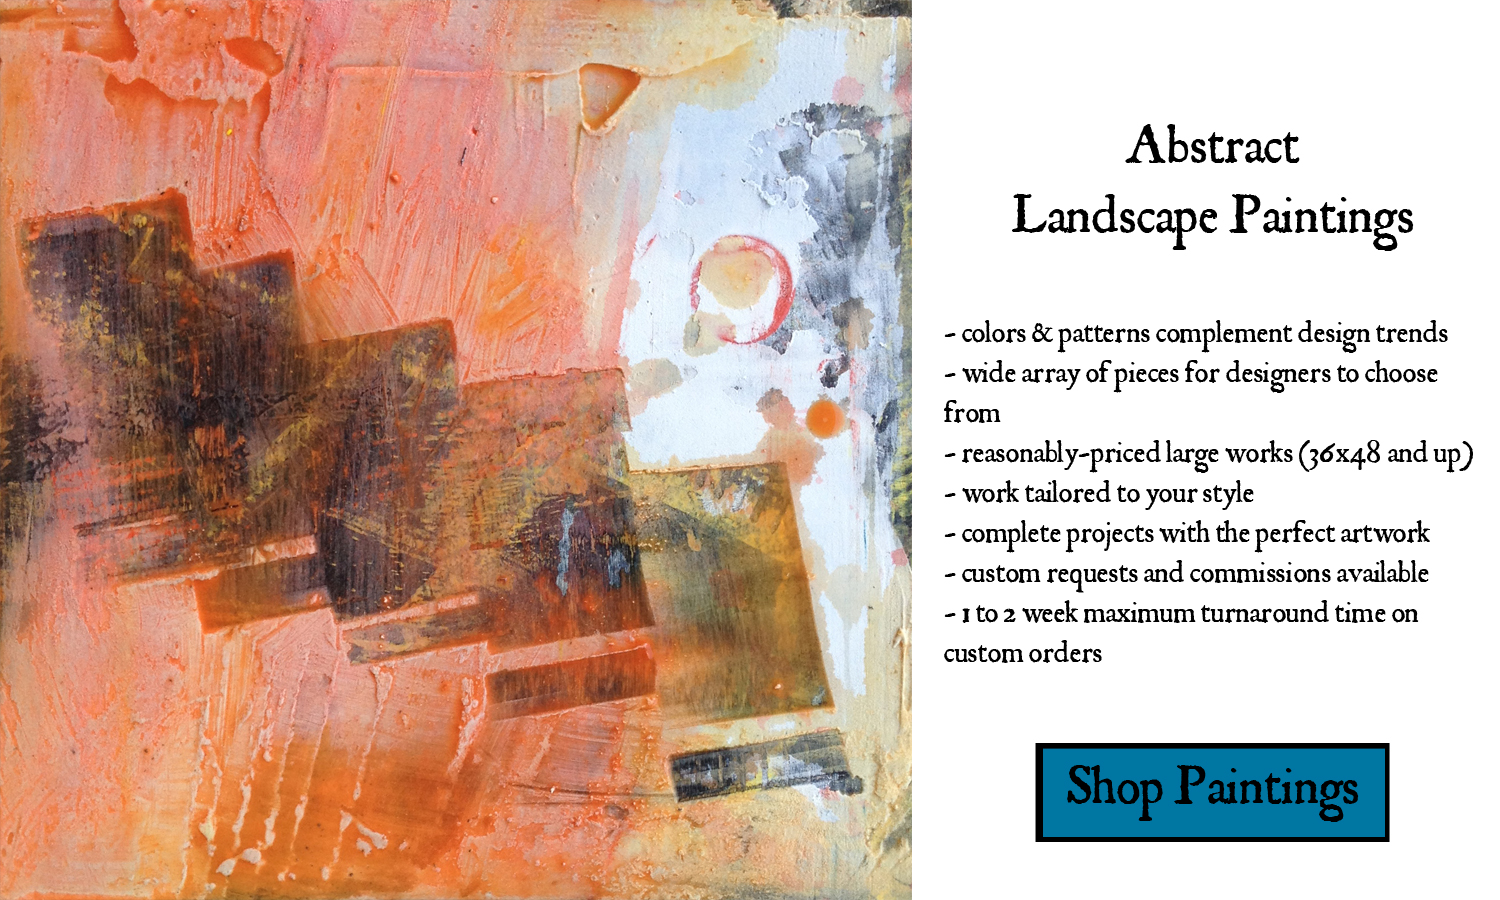 image: product of the month - abstract landscape paintings